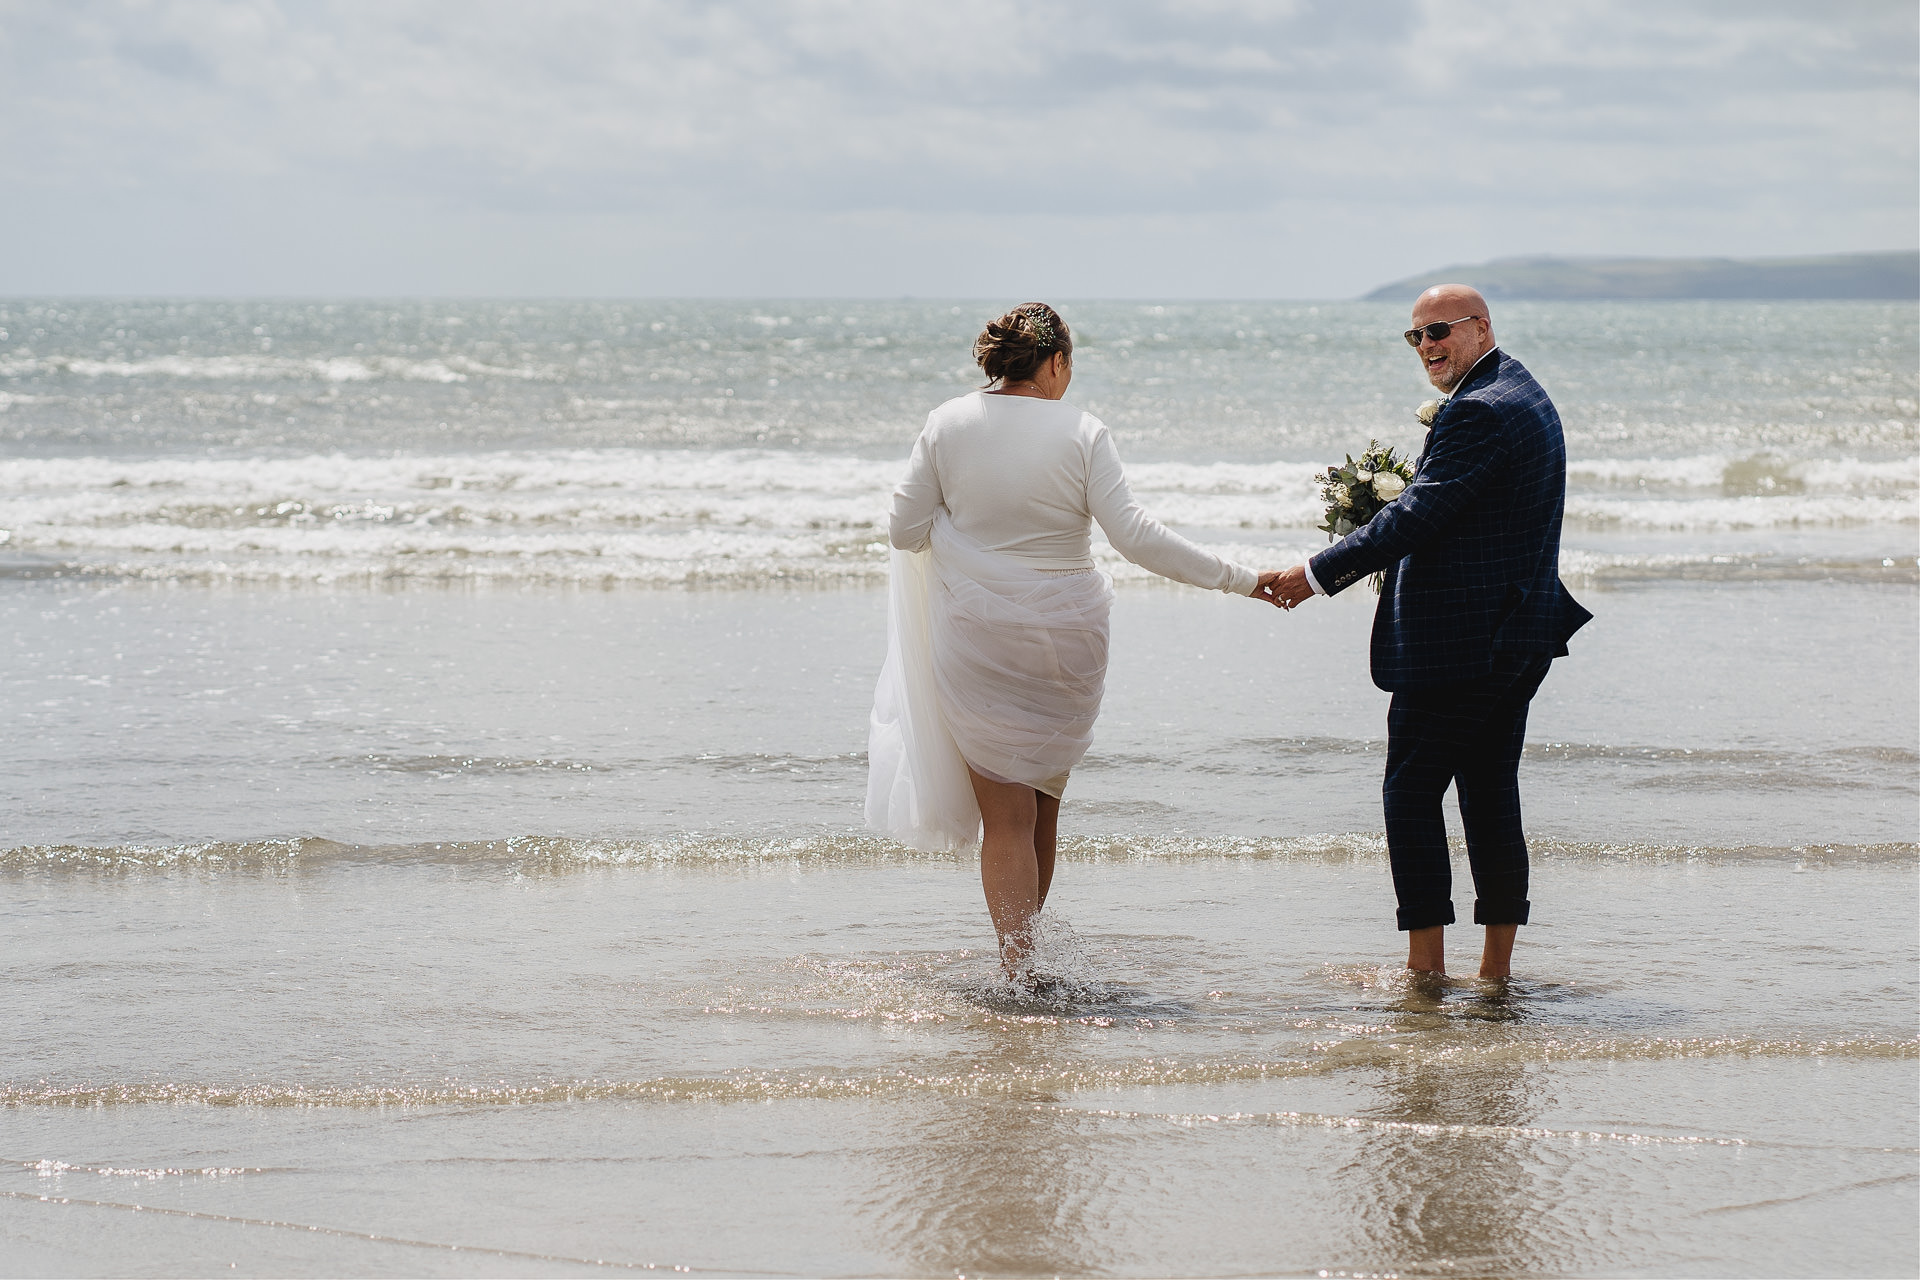 A bride and groom in wedding clothes, paddling barefoot in the sea in Cornwall